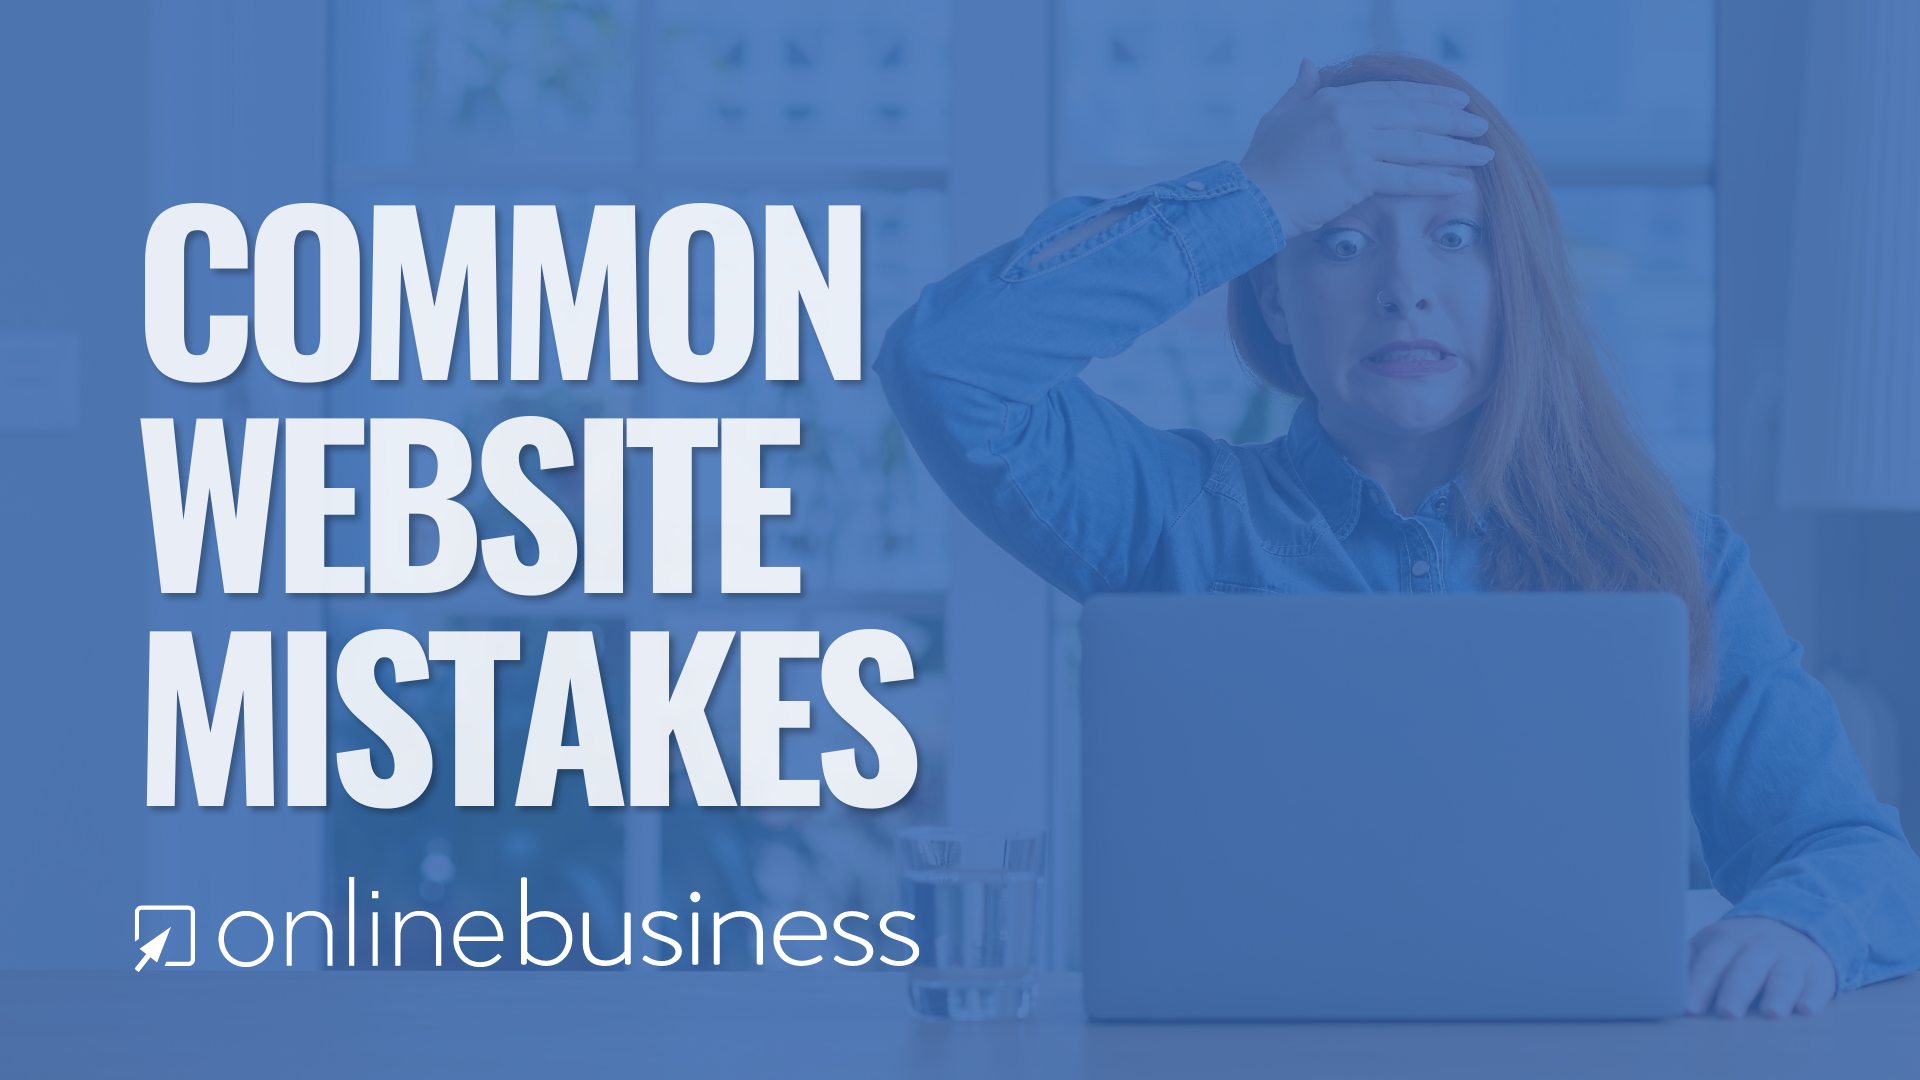 OnlineBusiness.com Offers Tips to Avoid Mistakes When Setting Up a Website